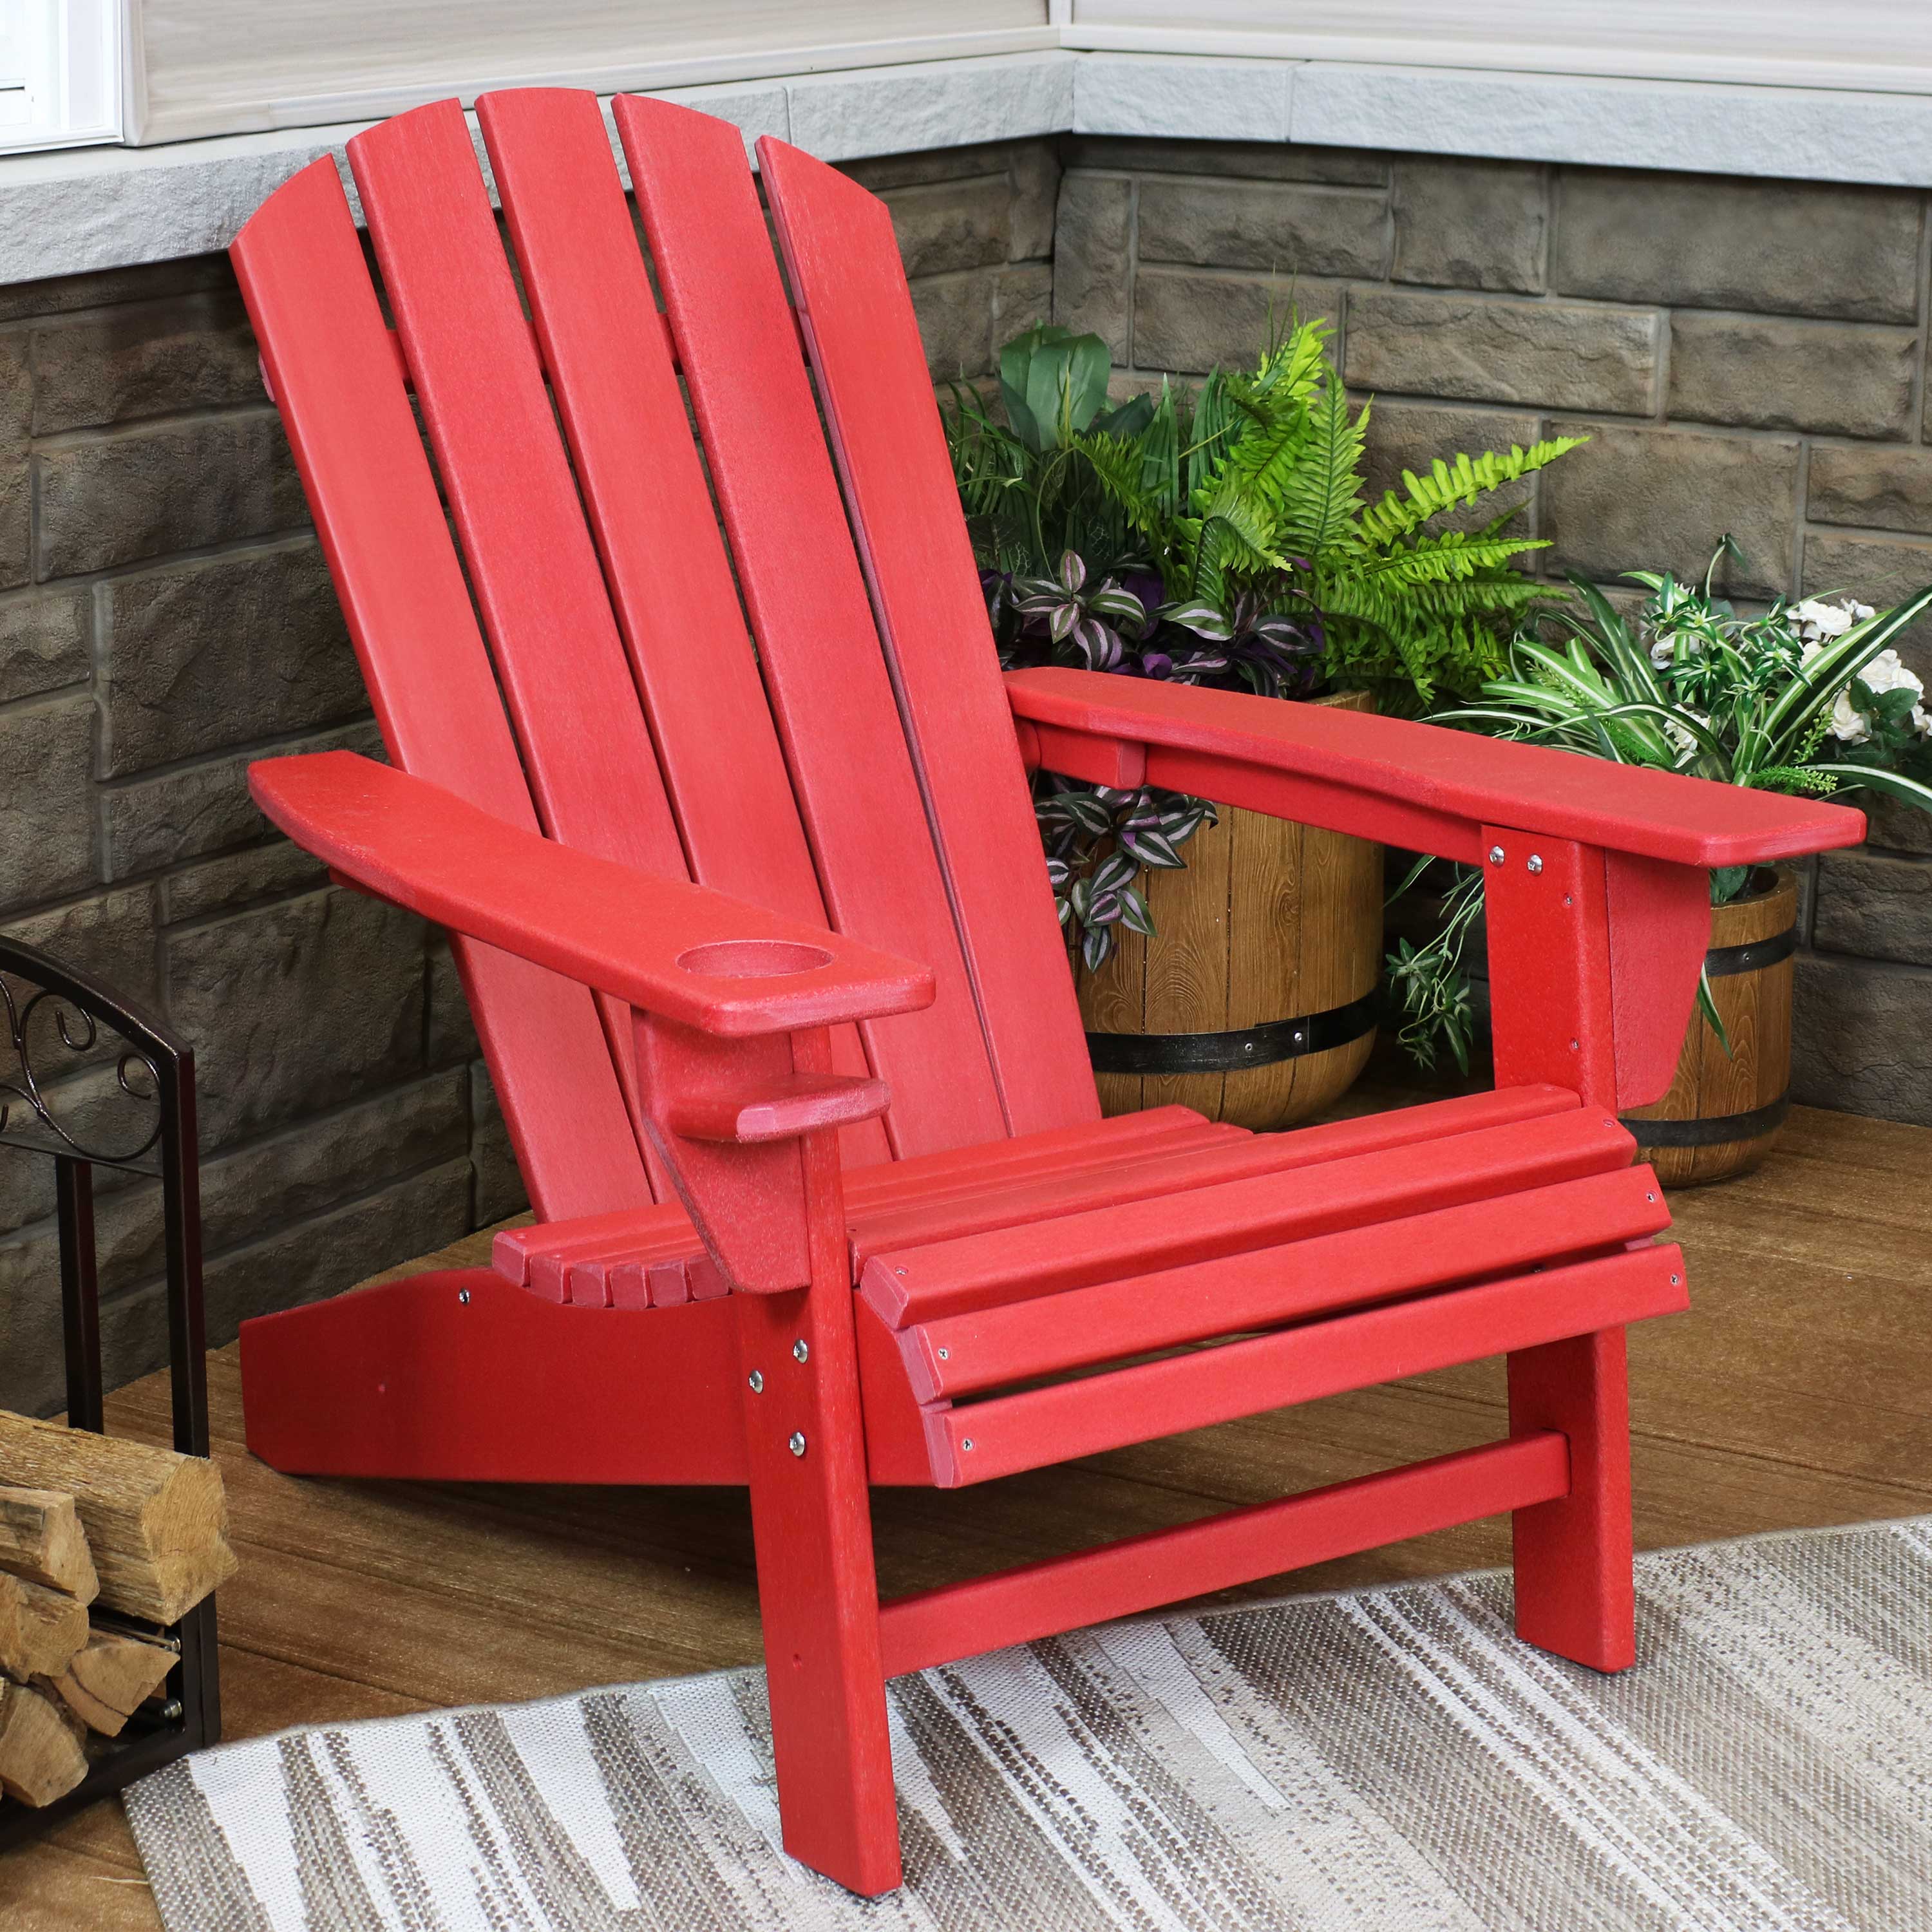 Sunnydaze All-Weather Outdoor Adirondack Chair with Drink Holder - Heavy Duty HDPE Weatherproof Patio Chair - Ideal for Lawn, Garden or Around the Firepit - Red - image 1 of 7